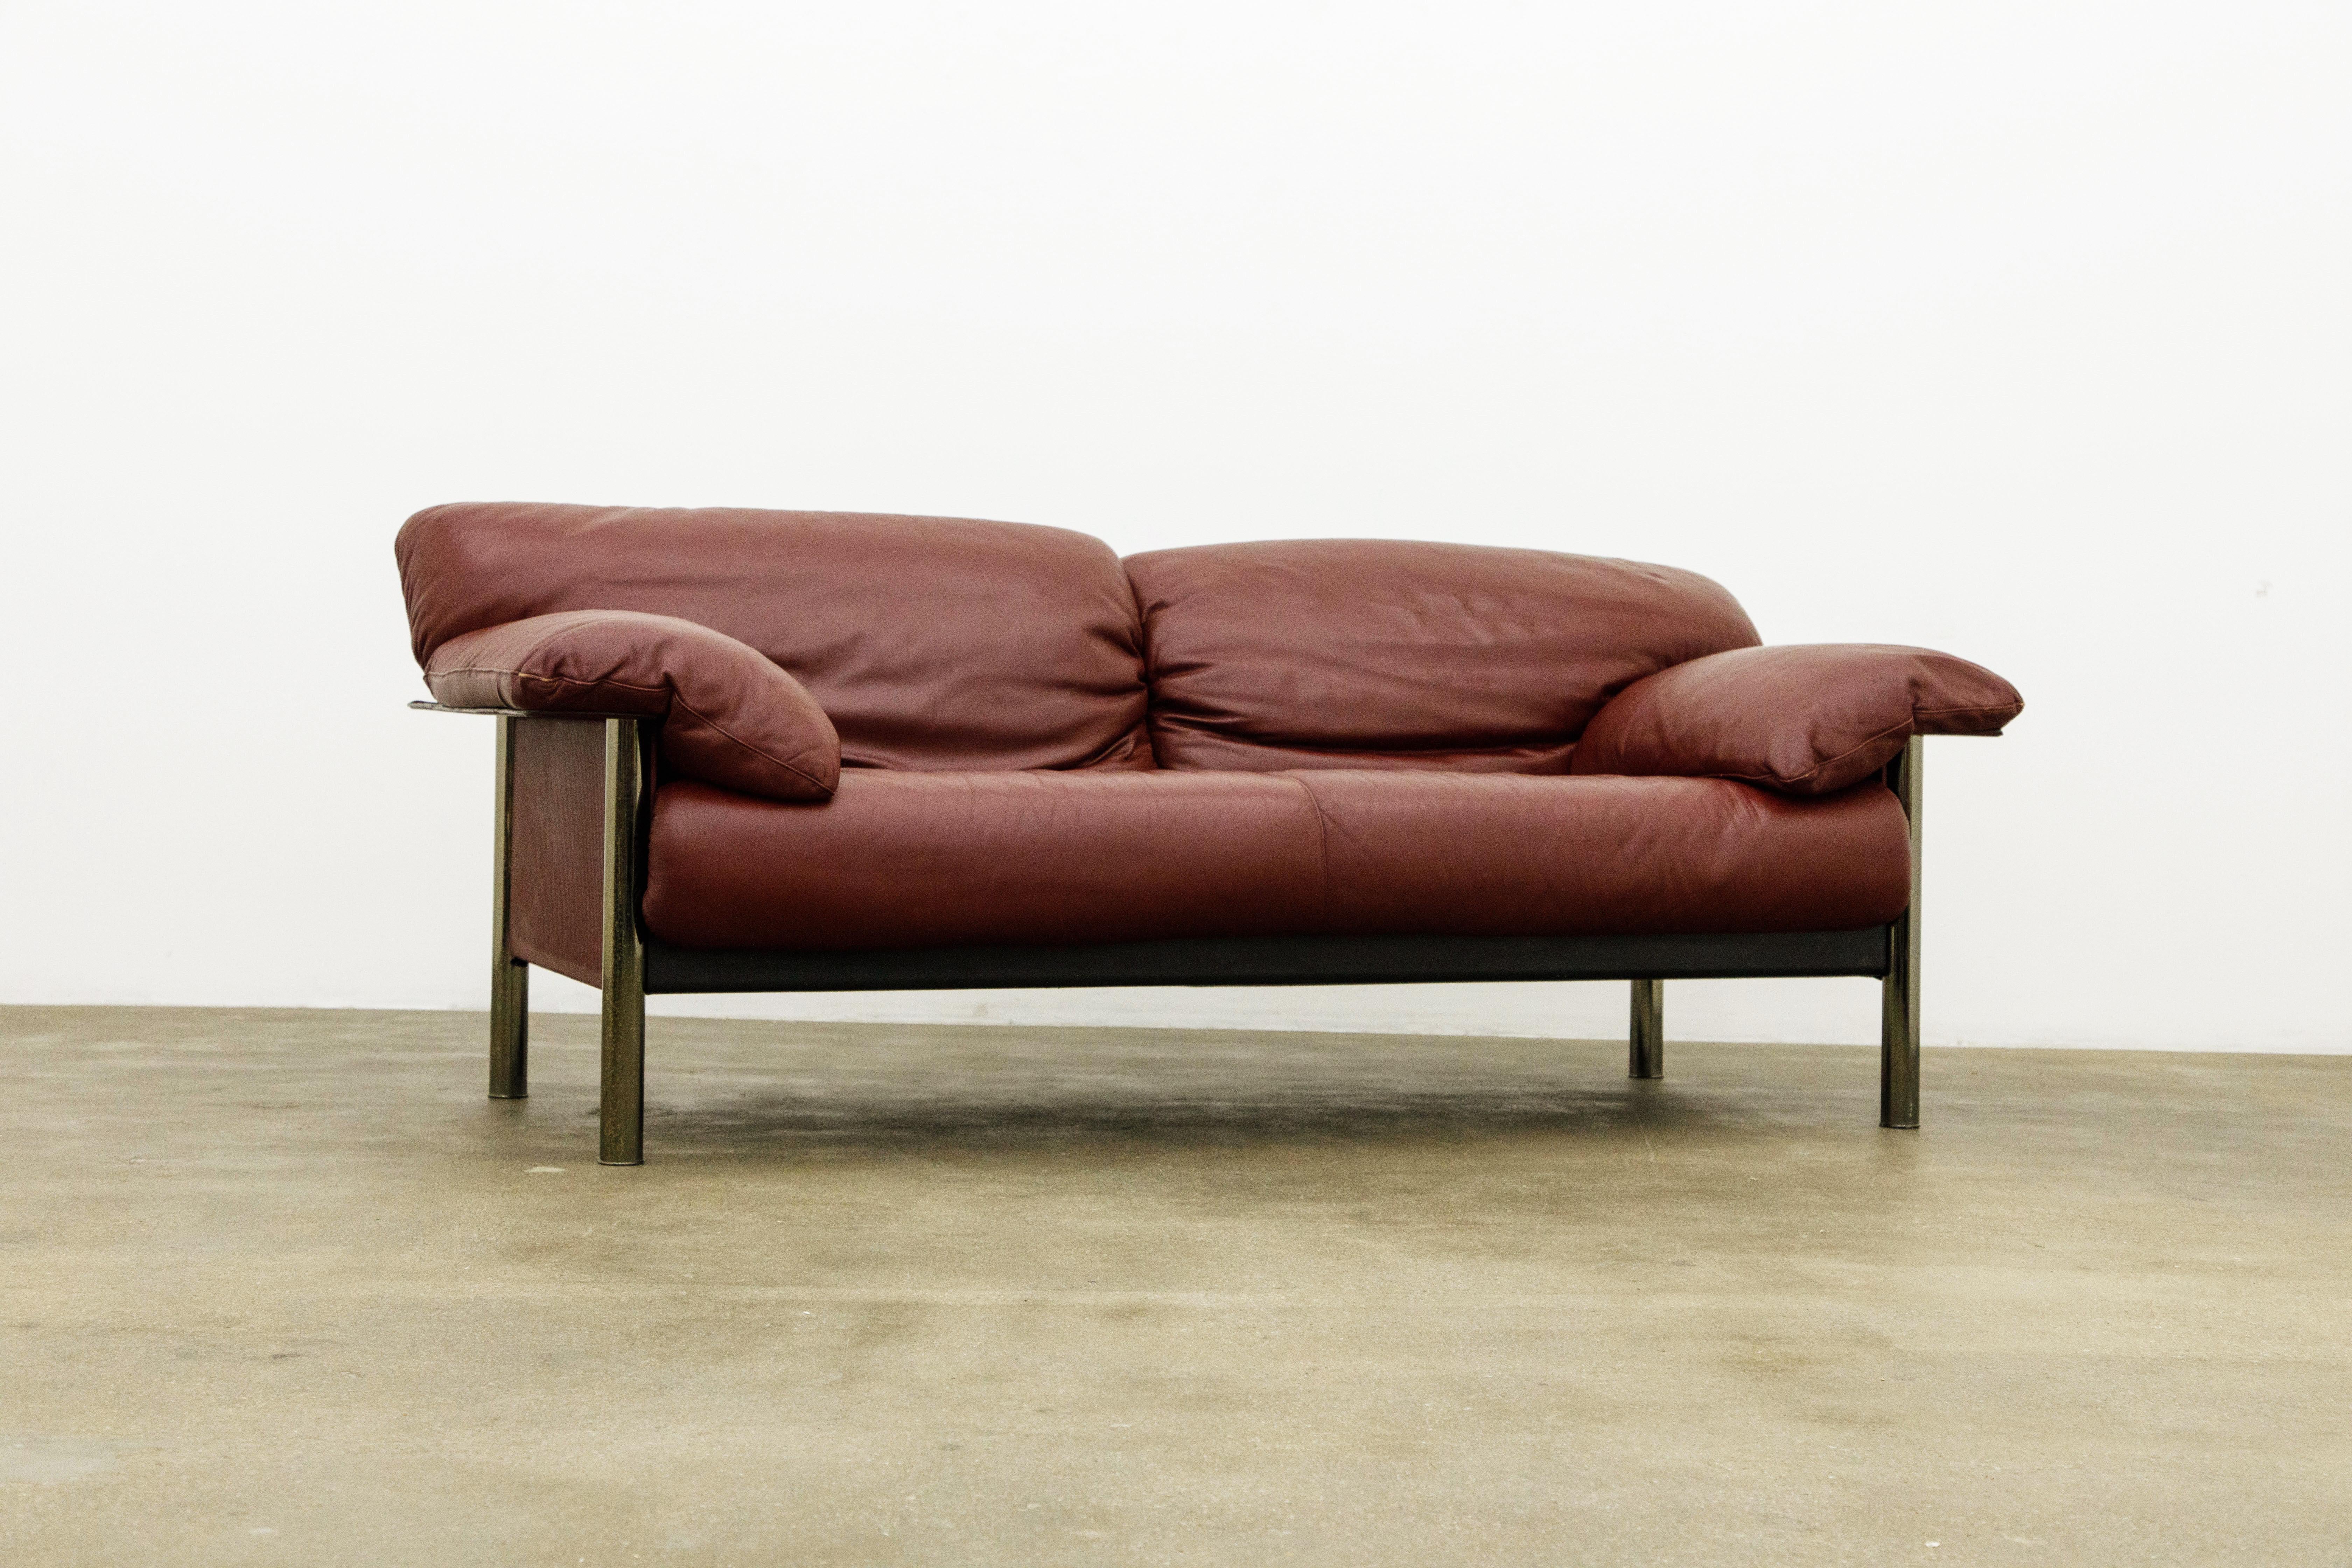 burgandy leather couch